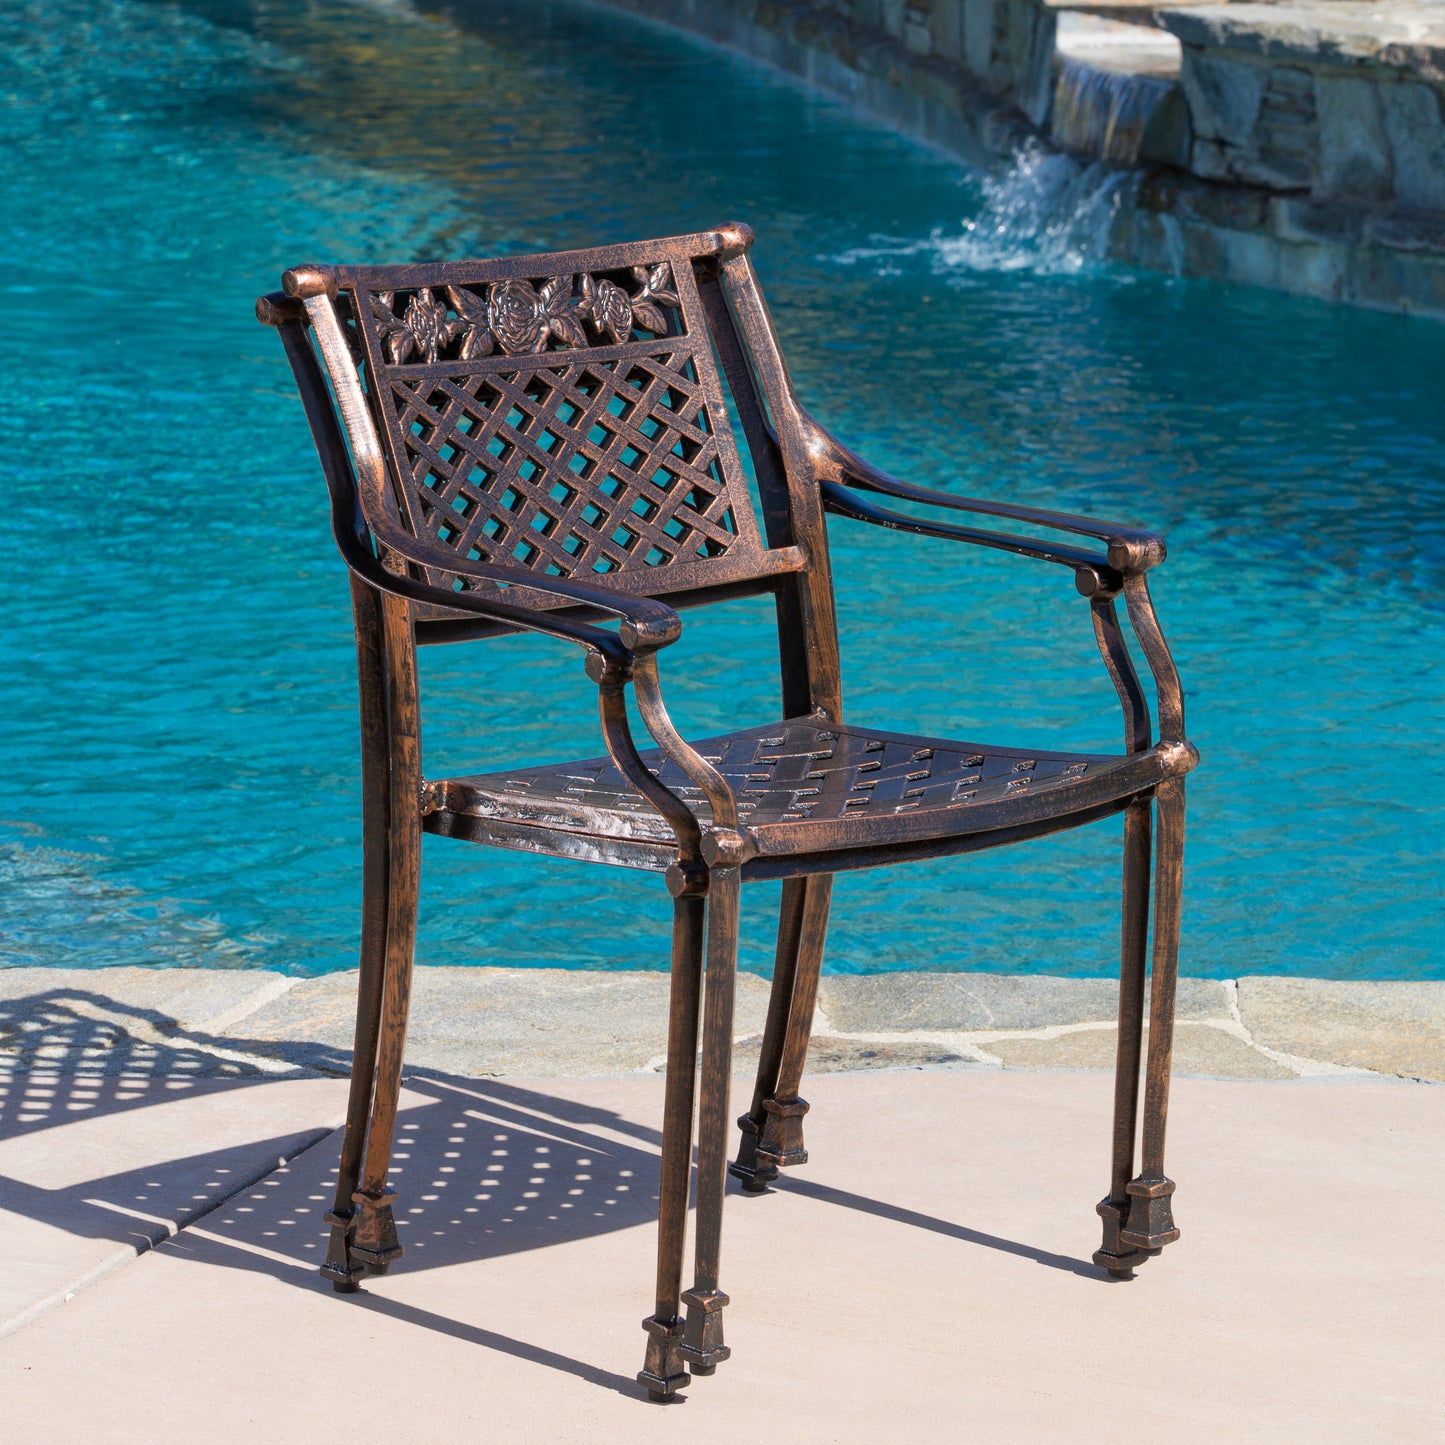 Sierra Outdoor Cast Aluminum Dining Chairs (Set of 2)